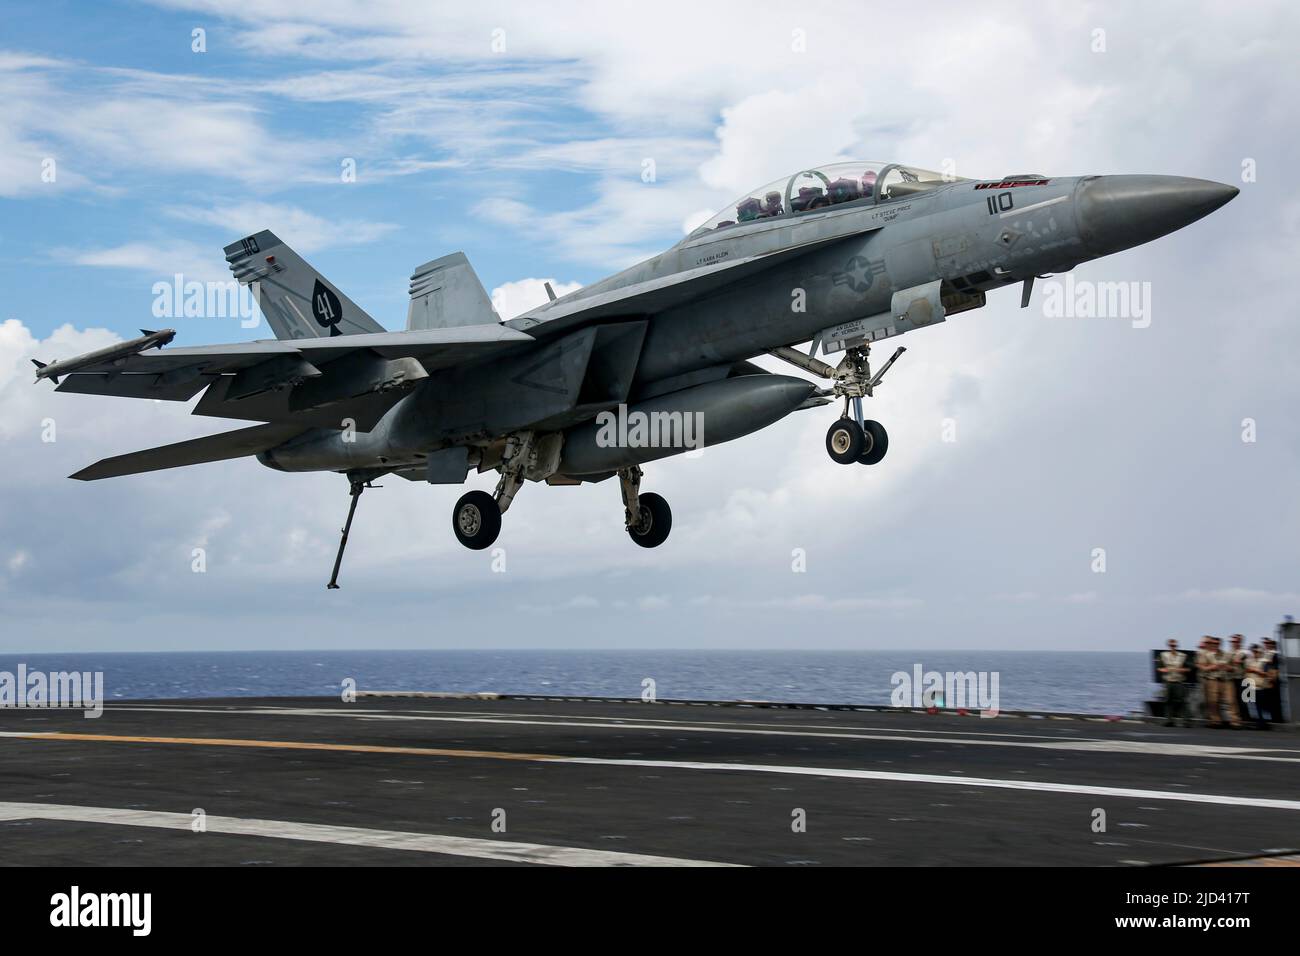 PHILIPPINE SEA (June 15, 2022) An F/A-18F Super Hornet, assigned to the 'Black Aces' of Strike Fighter Squadron (VFA) 41, prepares to make an arrested landing on the flight deck of the Nimitz-class aircraft carrier USS Abraham Lincoln (CVN 72). Abraham Lincoln Strike Group is on a scheduled deployment in the U.S. 7th Fleet area of operations to enhance interoperability through alliances and partnerships while serving as a ready-response force in support of a free and open Indo-Pacific region. (U.S. Navy photo by Mass Communication Specialist 3rd Class Michael Singley) Stock Photo